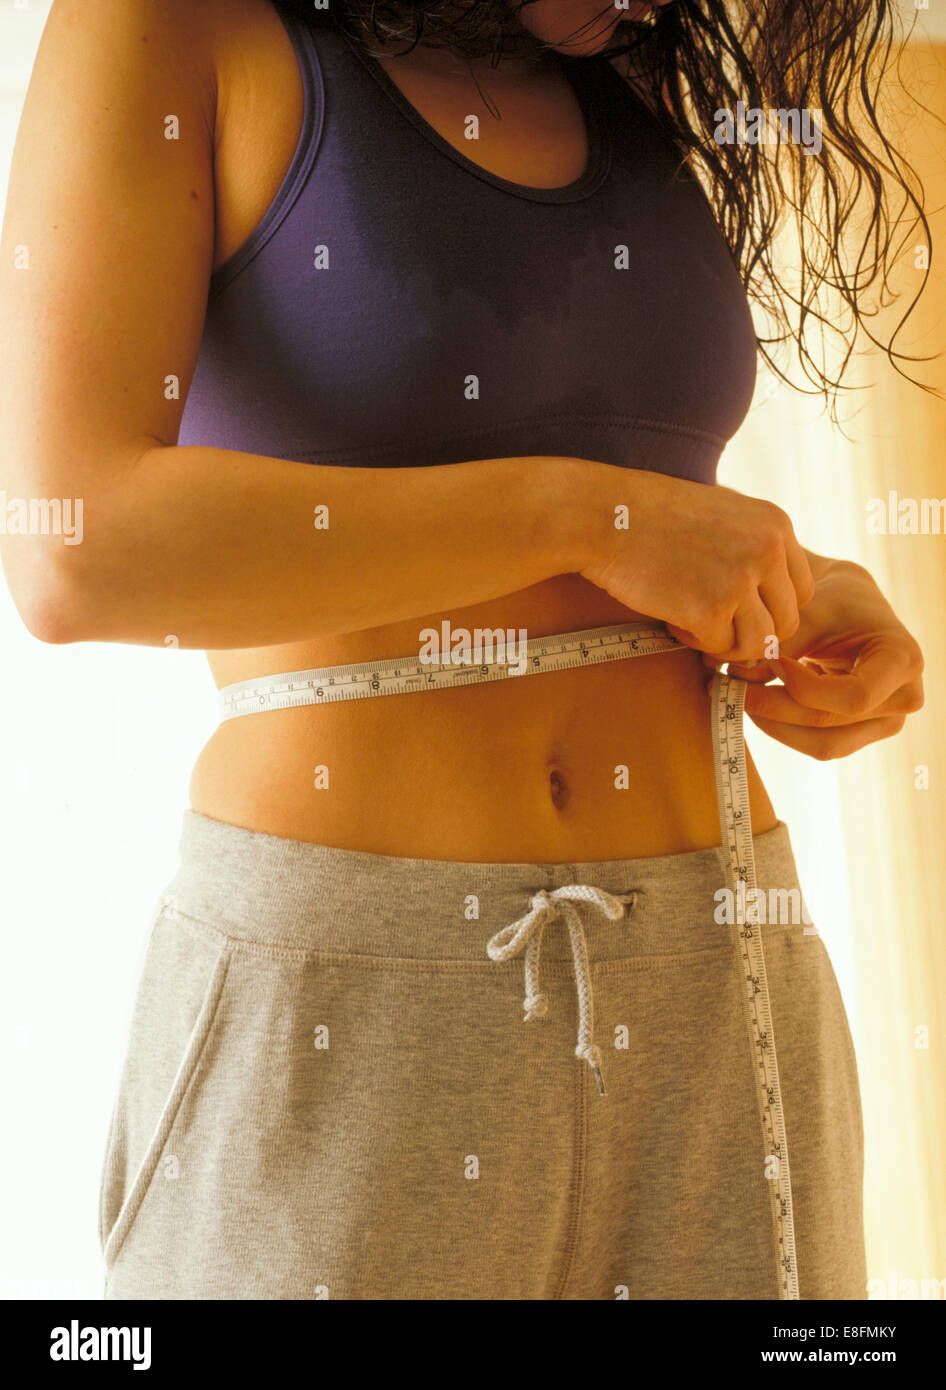 Measuring Bust, Waist, Hips. Beautiful Fit Girl Wrapped with Three  Measuring Tapes in Inch. Stock Photo - Image of isolated, diet: 34747104